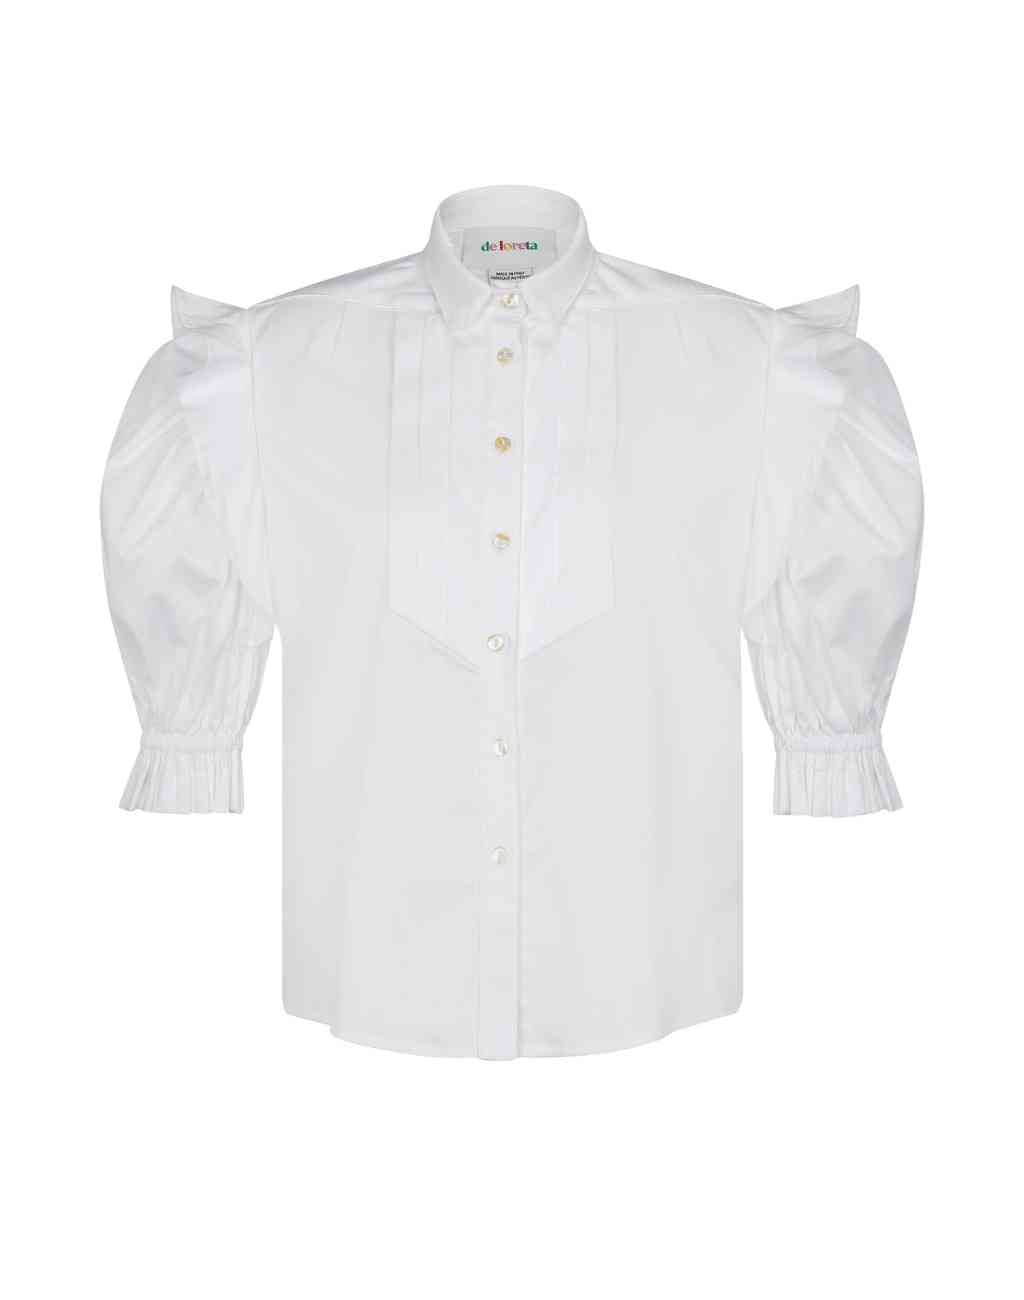 Chia Blouse with Pleated Front Placket and Puffed Sleeve with Ruffle - Visit Nifty De Loreta 